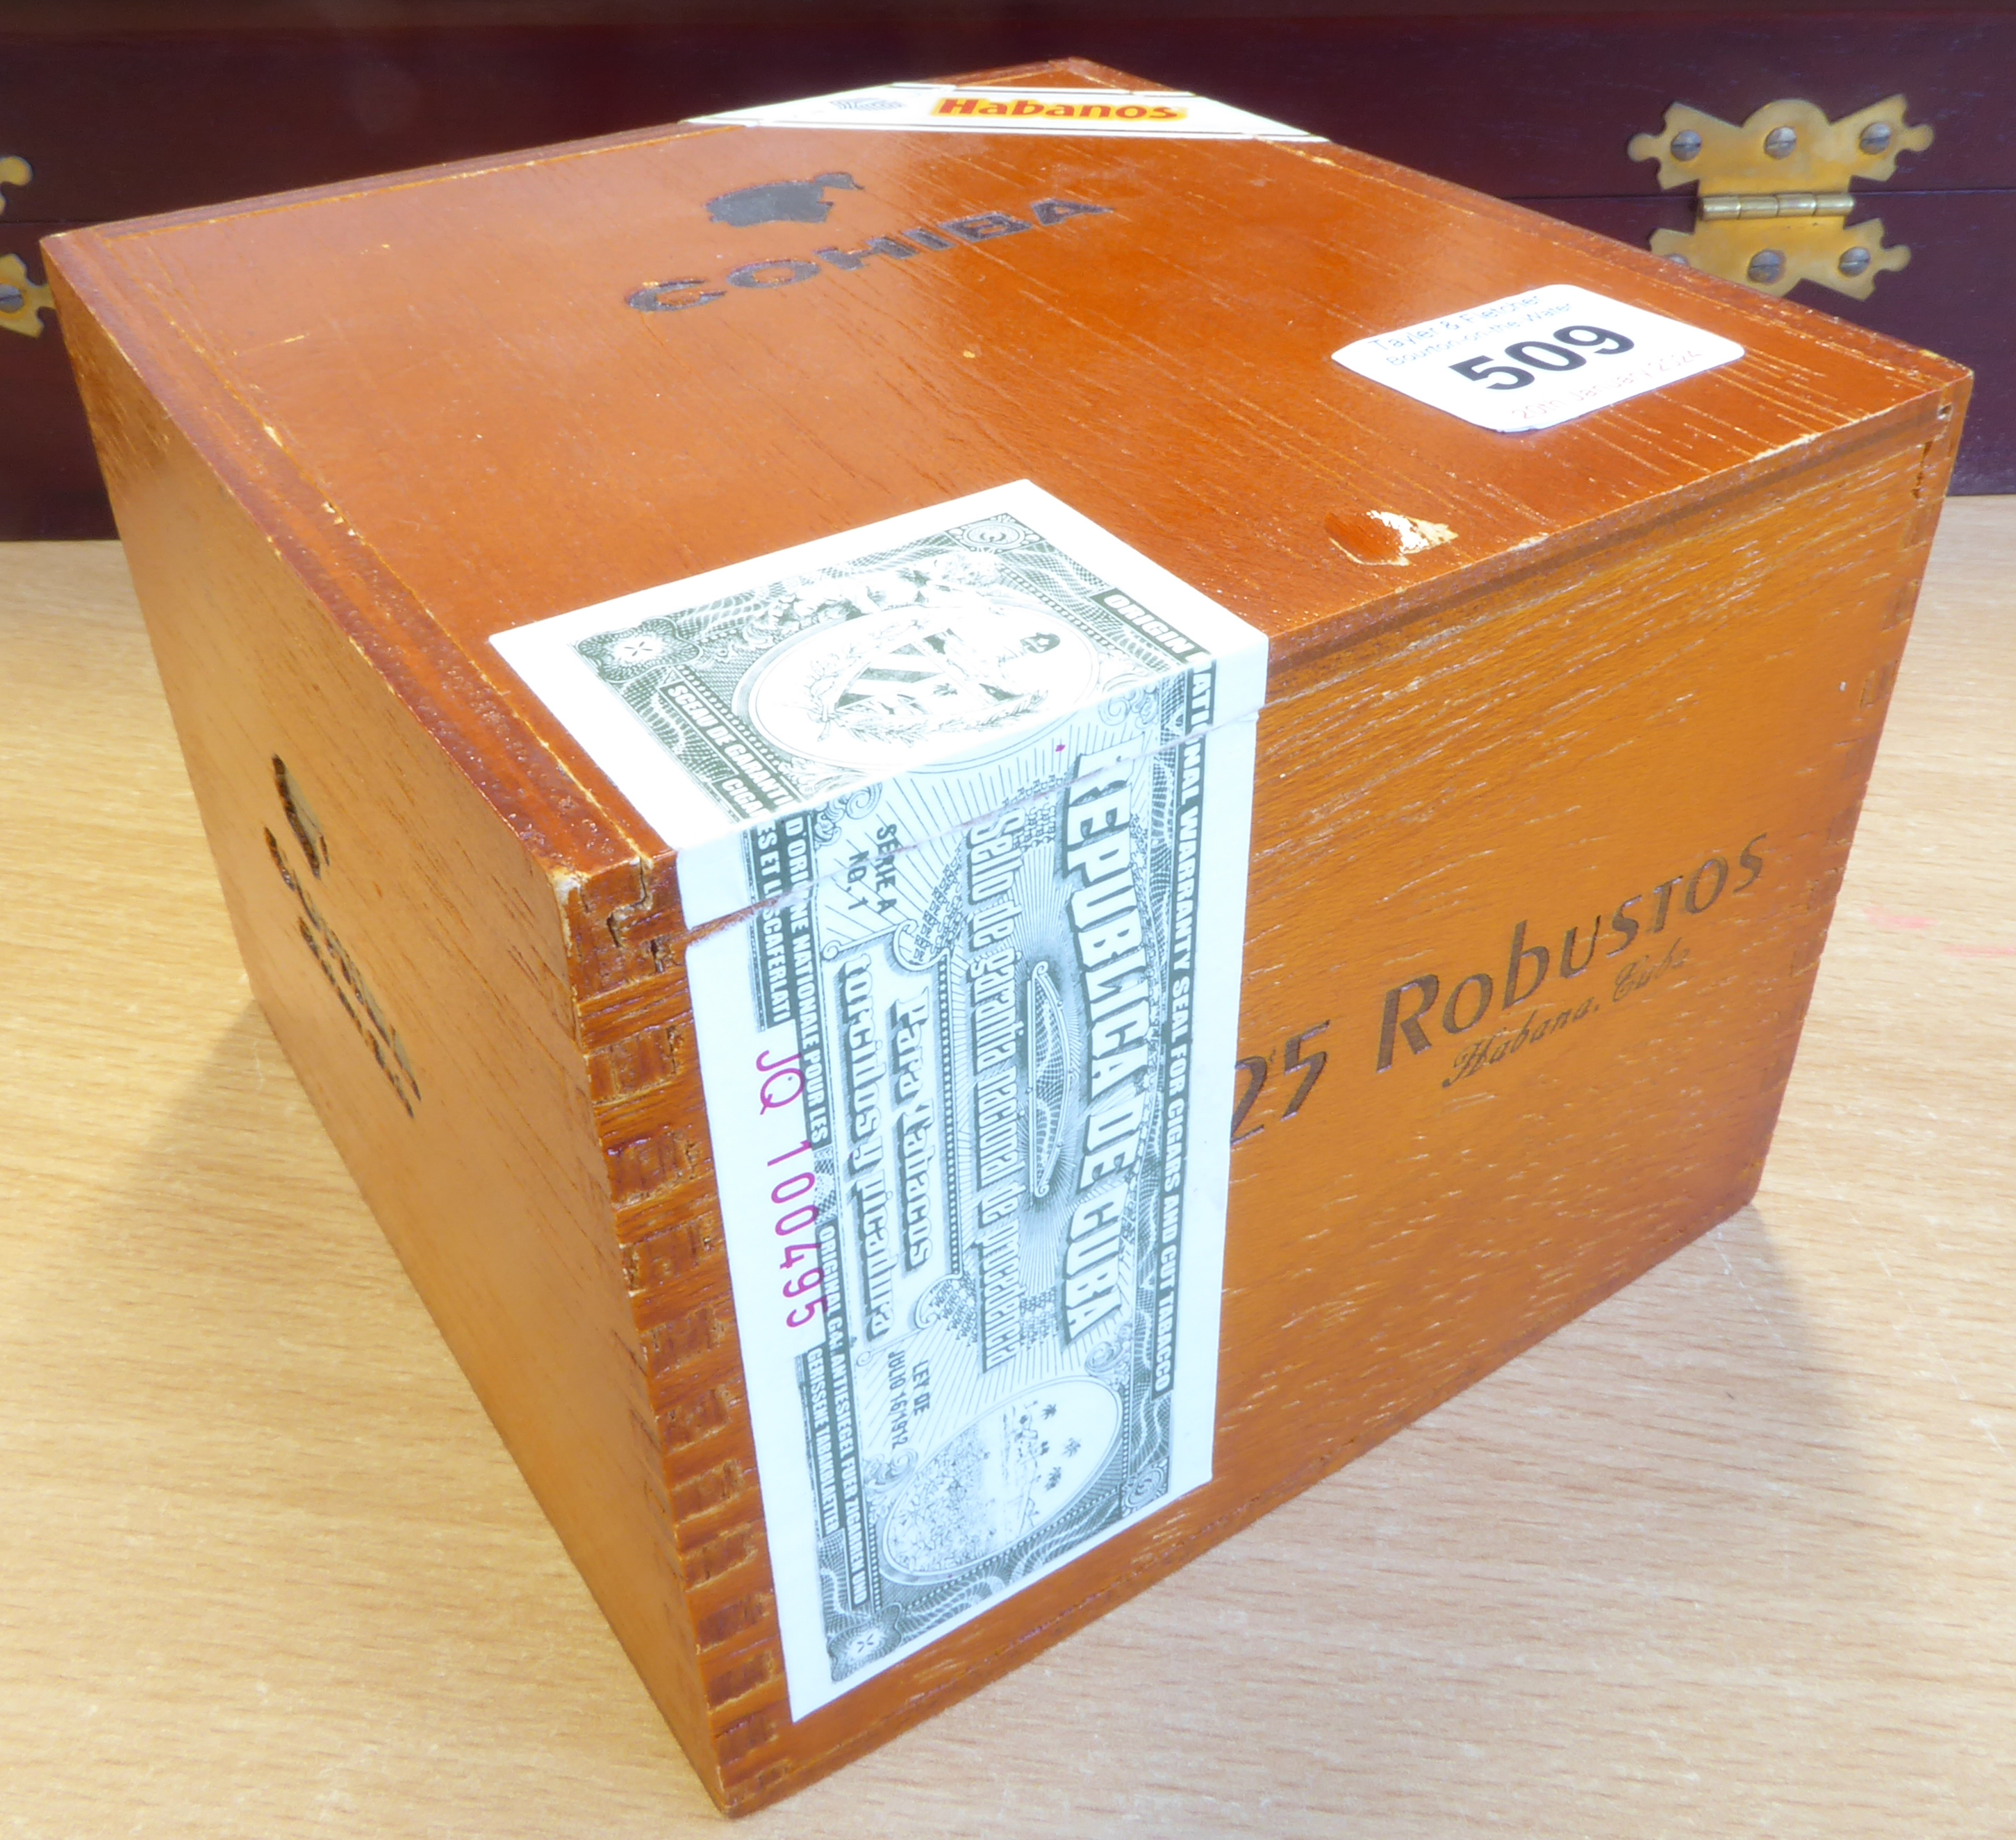 An opened box of Cohiba Robustos cigars (22 cigars) * Please note: These cigars (and also lot 510) - Image 11 of 12